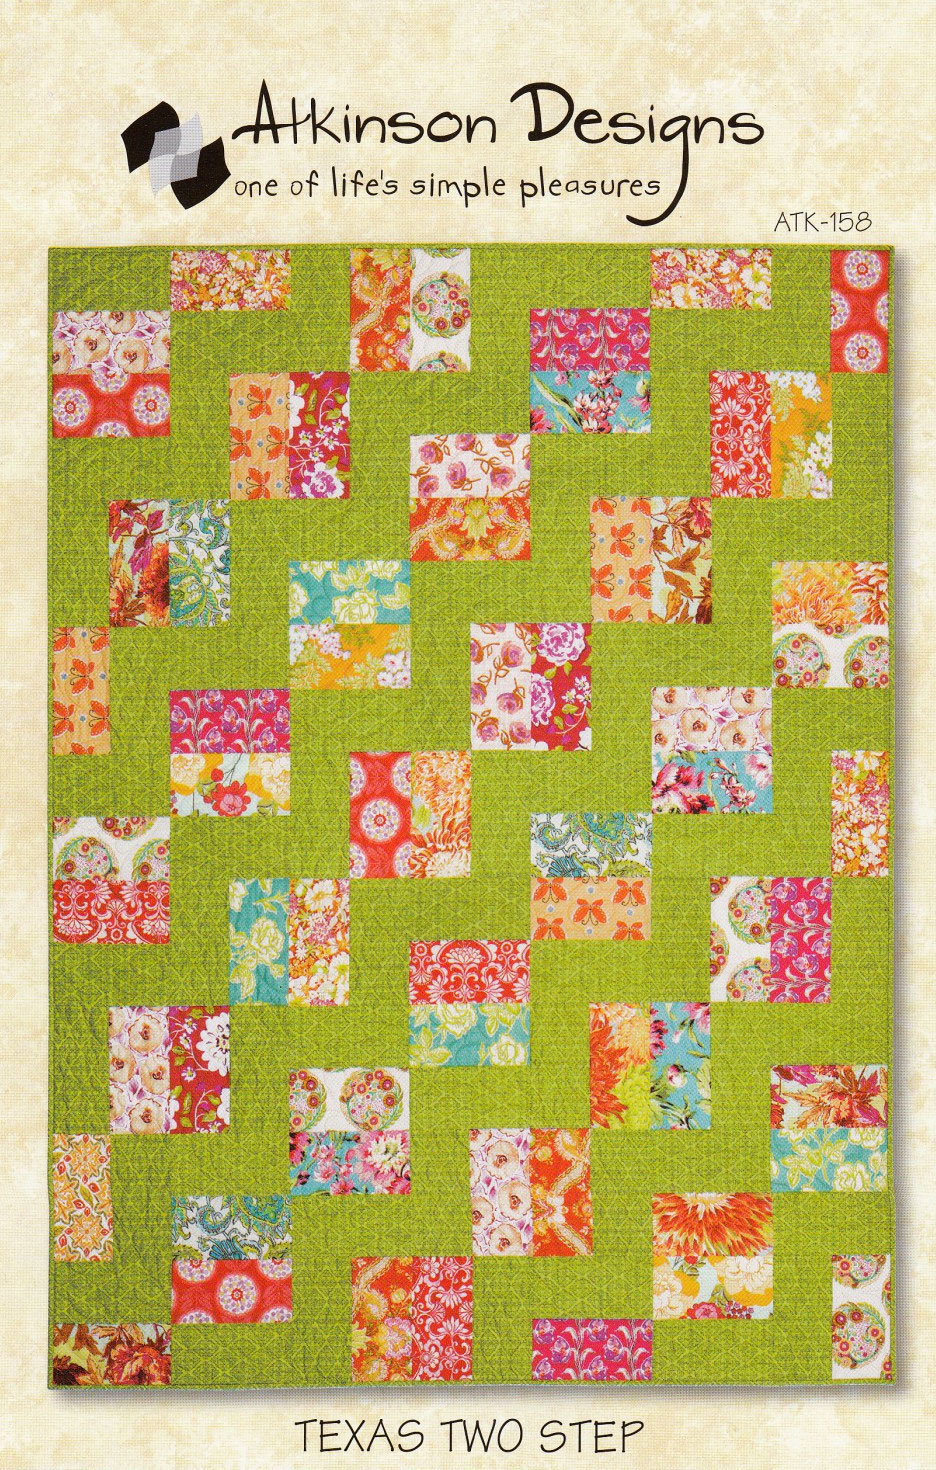 Texas-Two-Step-quilt-sewing-pattern-Atkinson-Designs-front